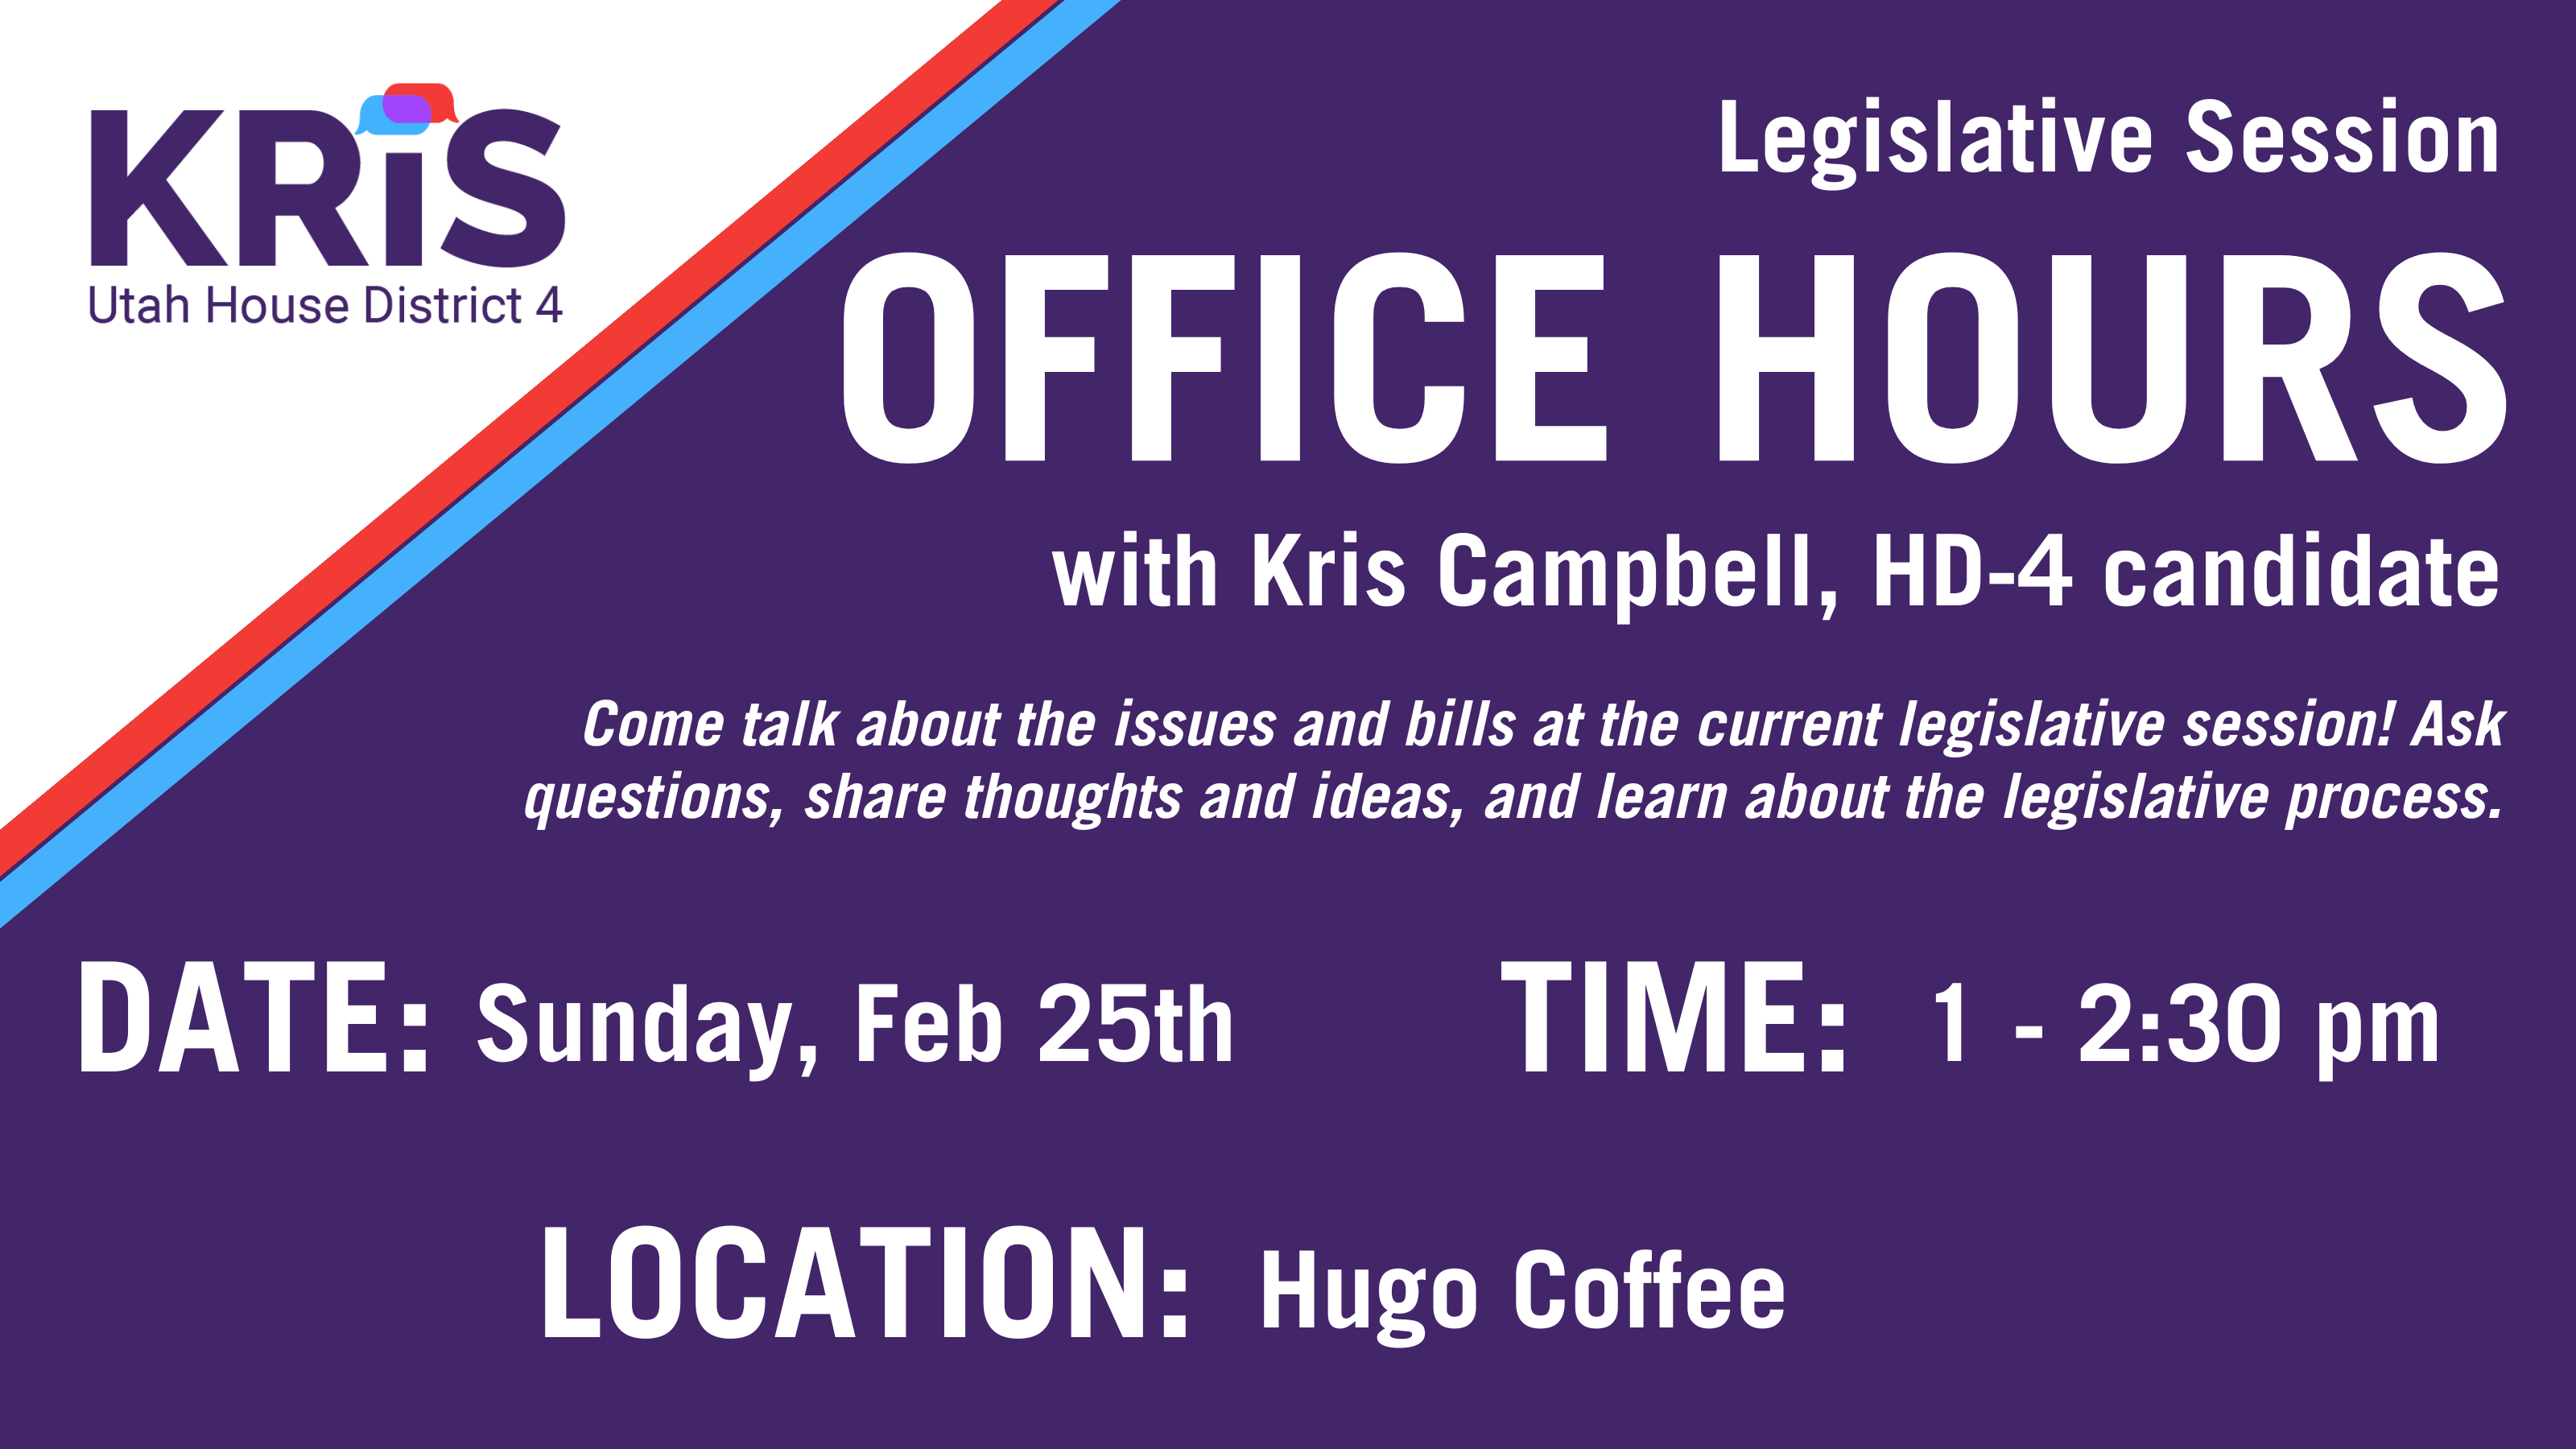 Legislative Session Office Hours with Kris Campbell, HD 4 Candidate. Friday, Feb 25th, from 1-2:30 pm at Hugo Coffee